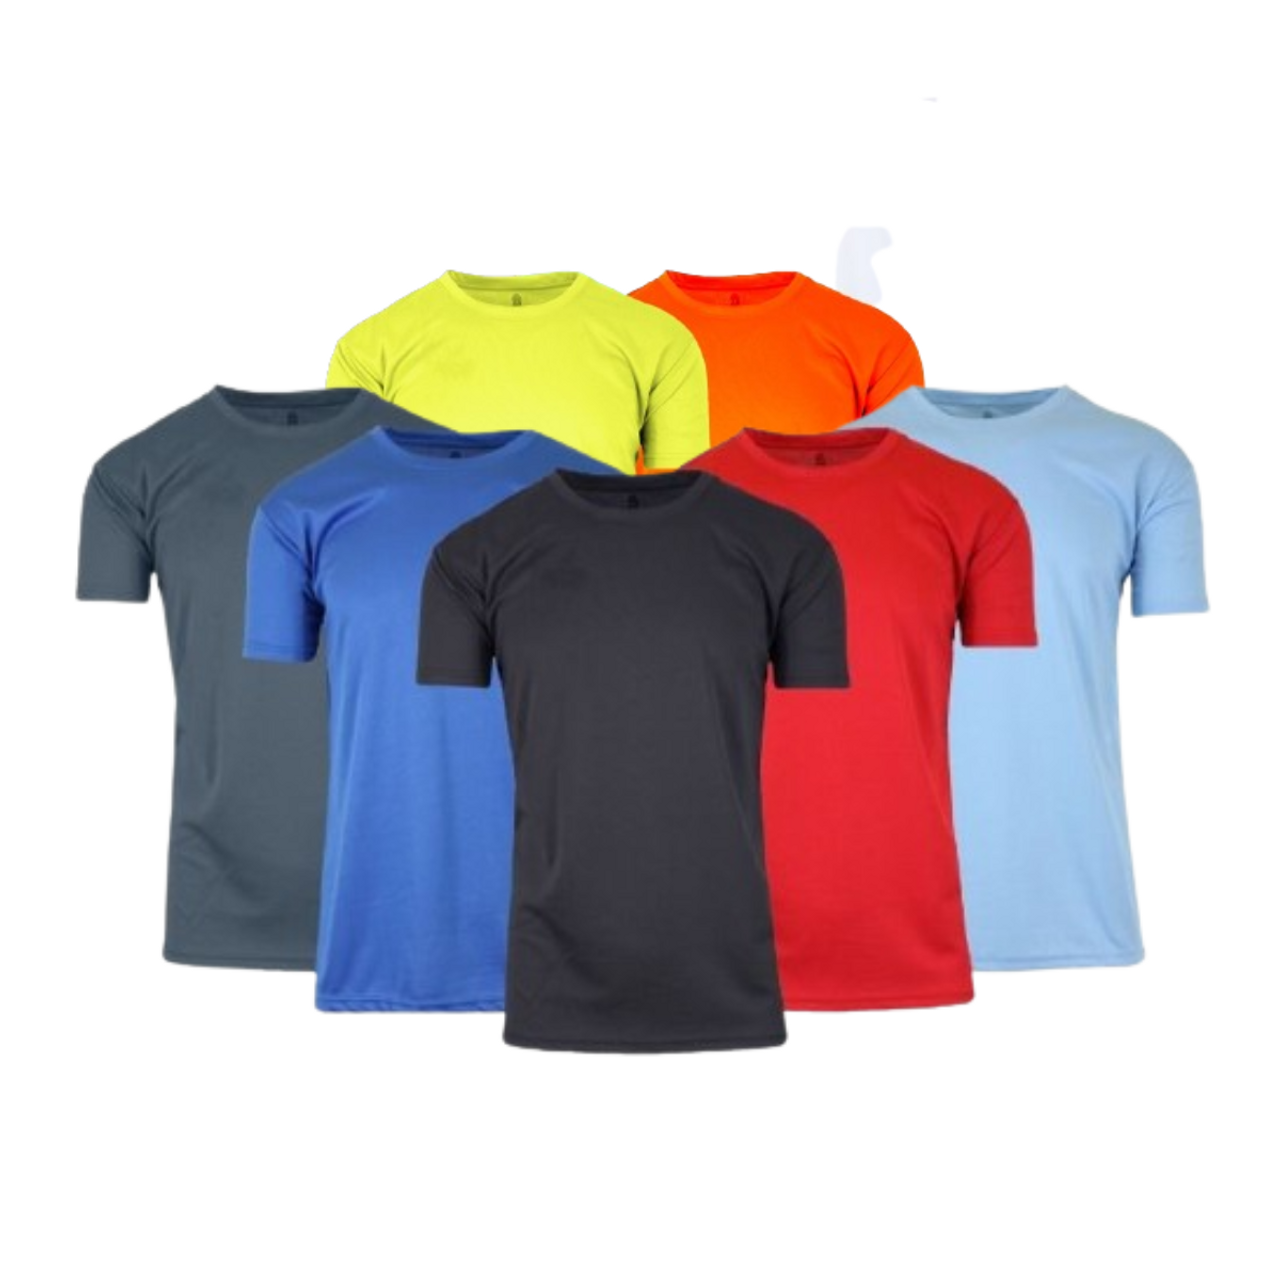 Men's Moisture-Wicking Wrinkle-Free Performance Tee (3-, 4- or 5-Pack) product image